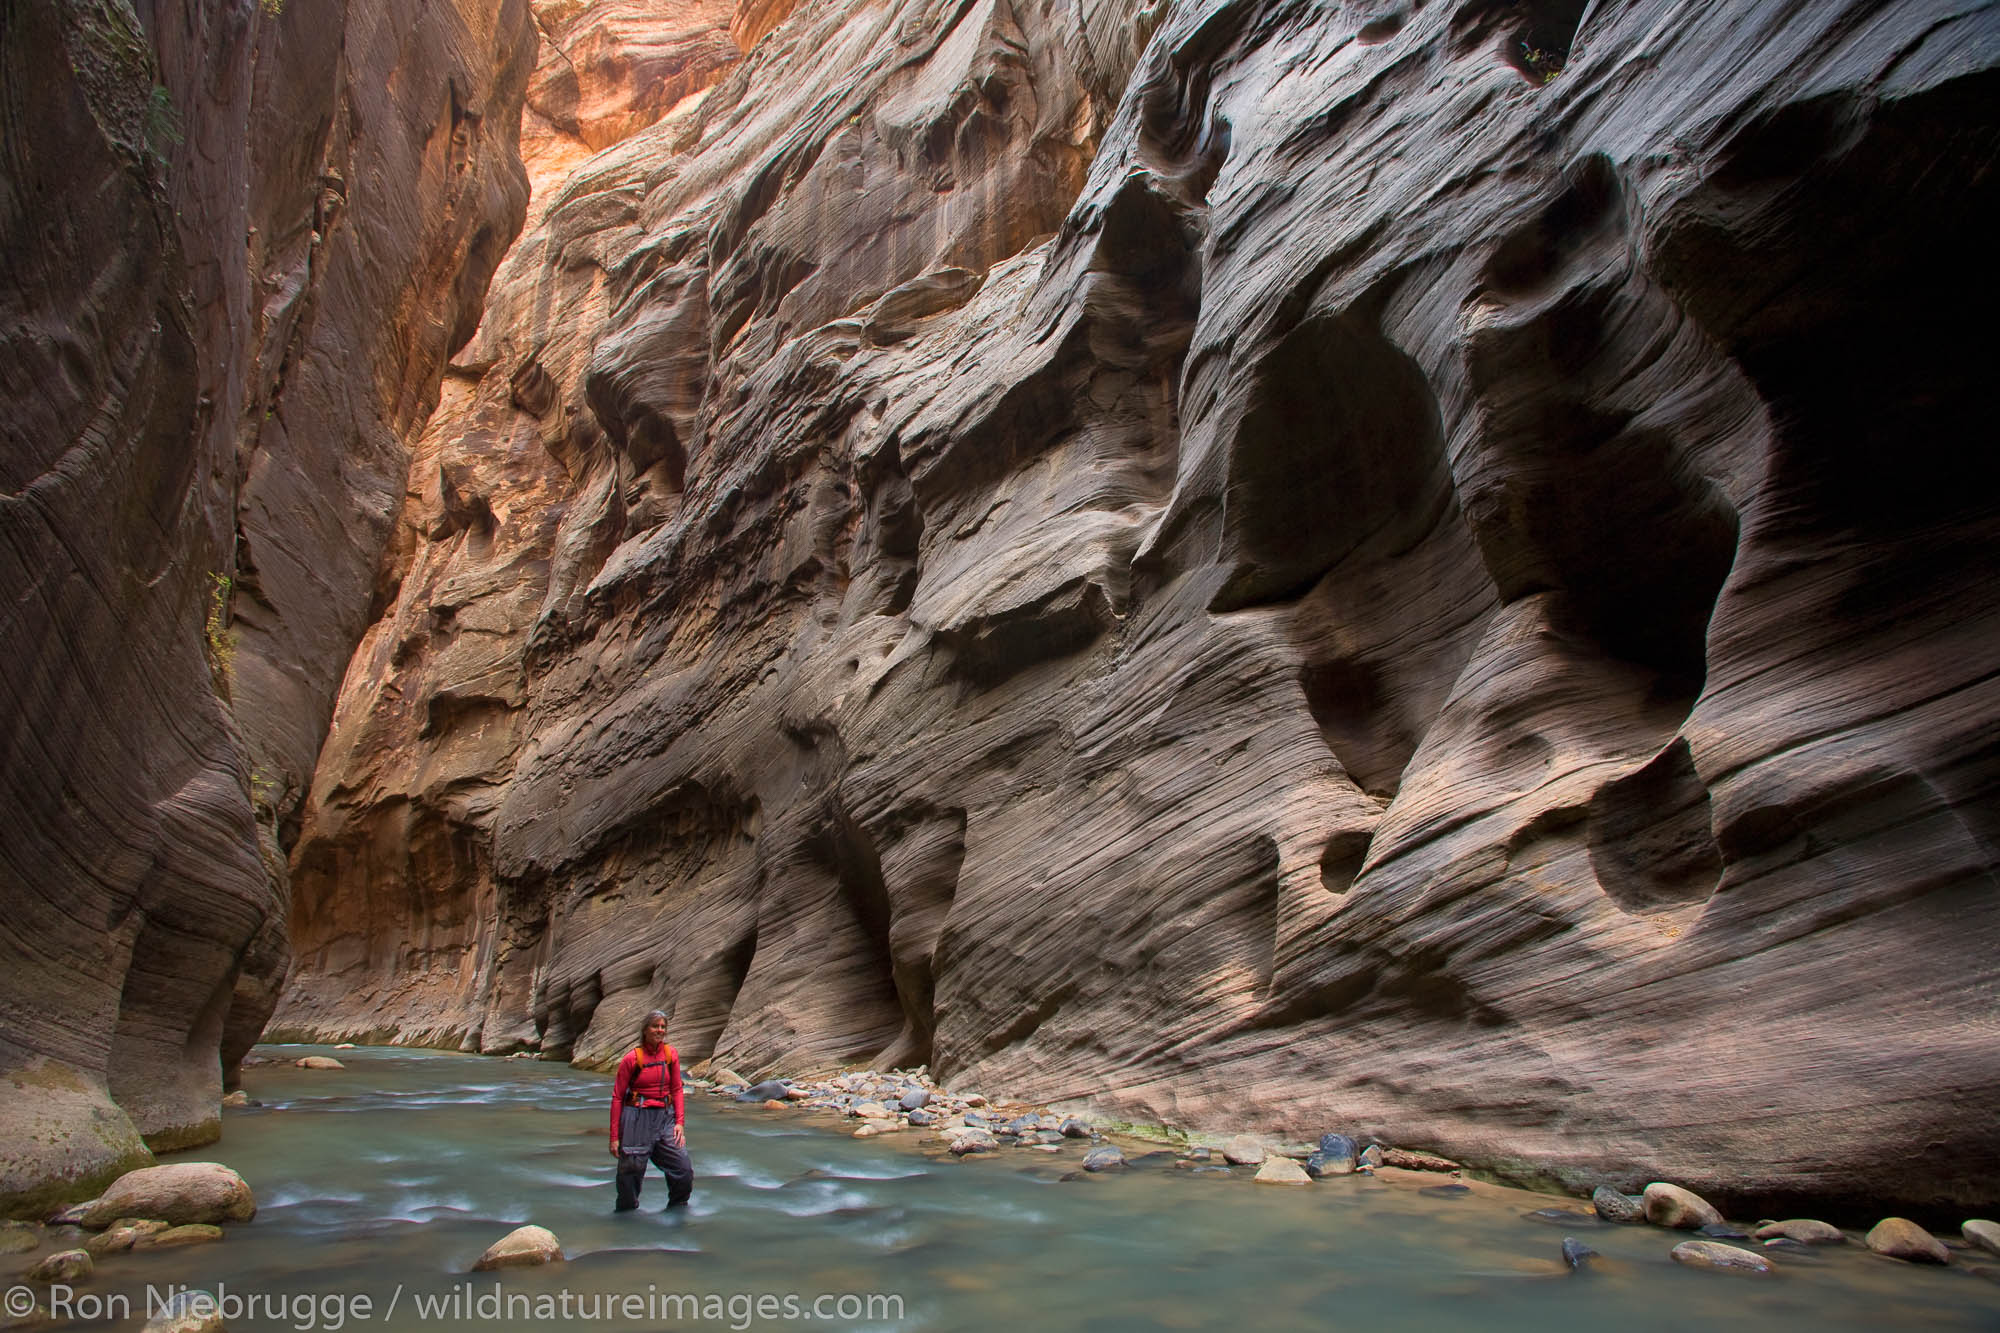 A hiker and the Virgin River in the Zion Narrows, Zion National Park, Utah.  (model released)